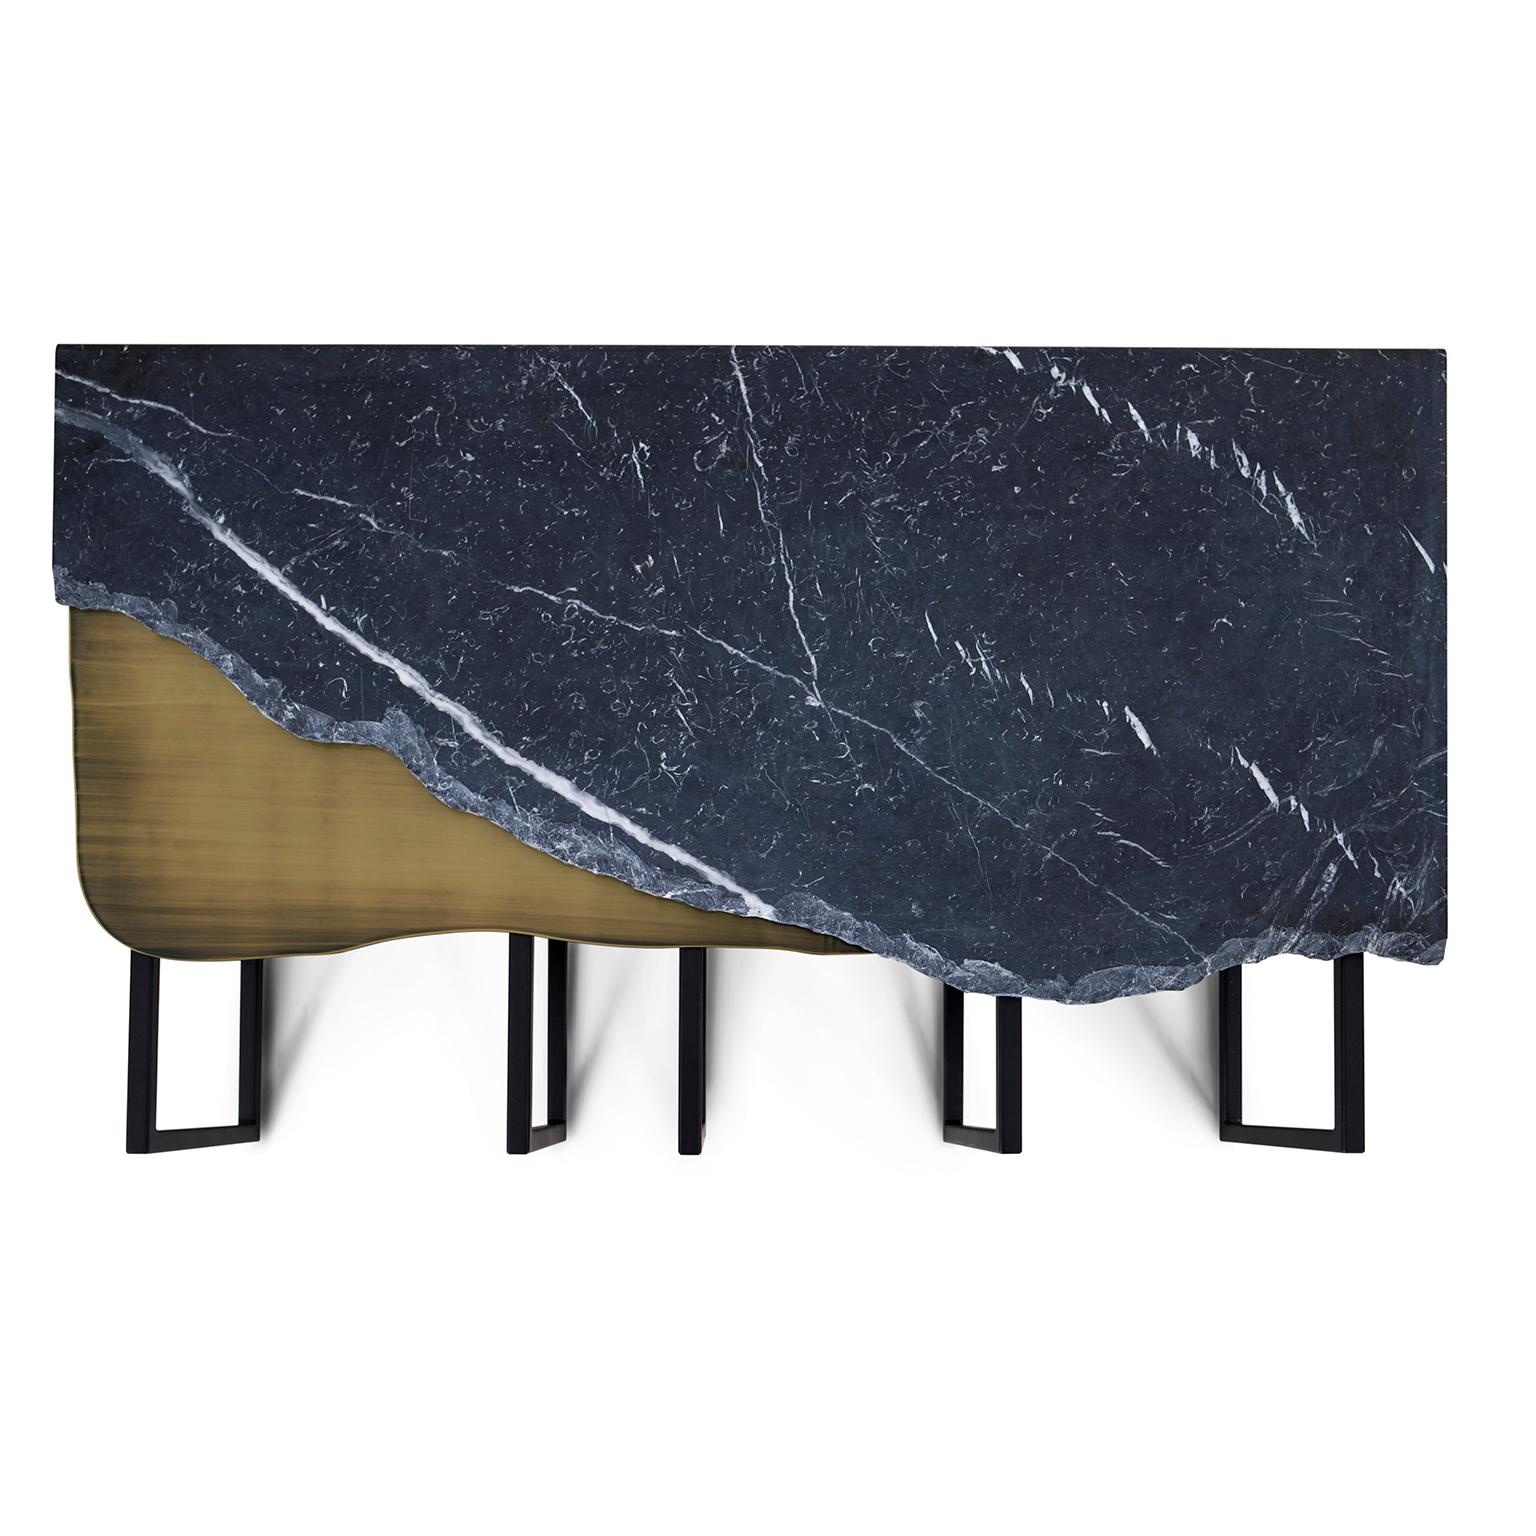 Aire Coffee Table, Contemporary Collection, Handcrafted in Portugal - Europe by Greenapple.

Designed by Rute Martins for the Contemporary Collection, Aire's bold and irregular aesthetic lends itself perfectly to modern interior design. The